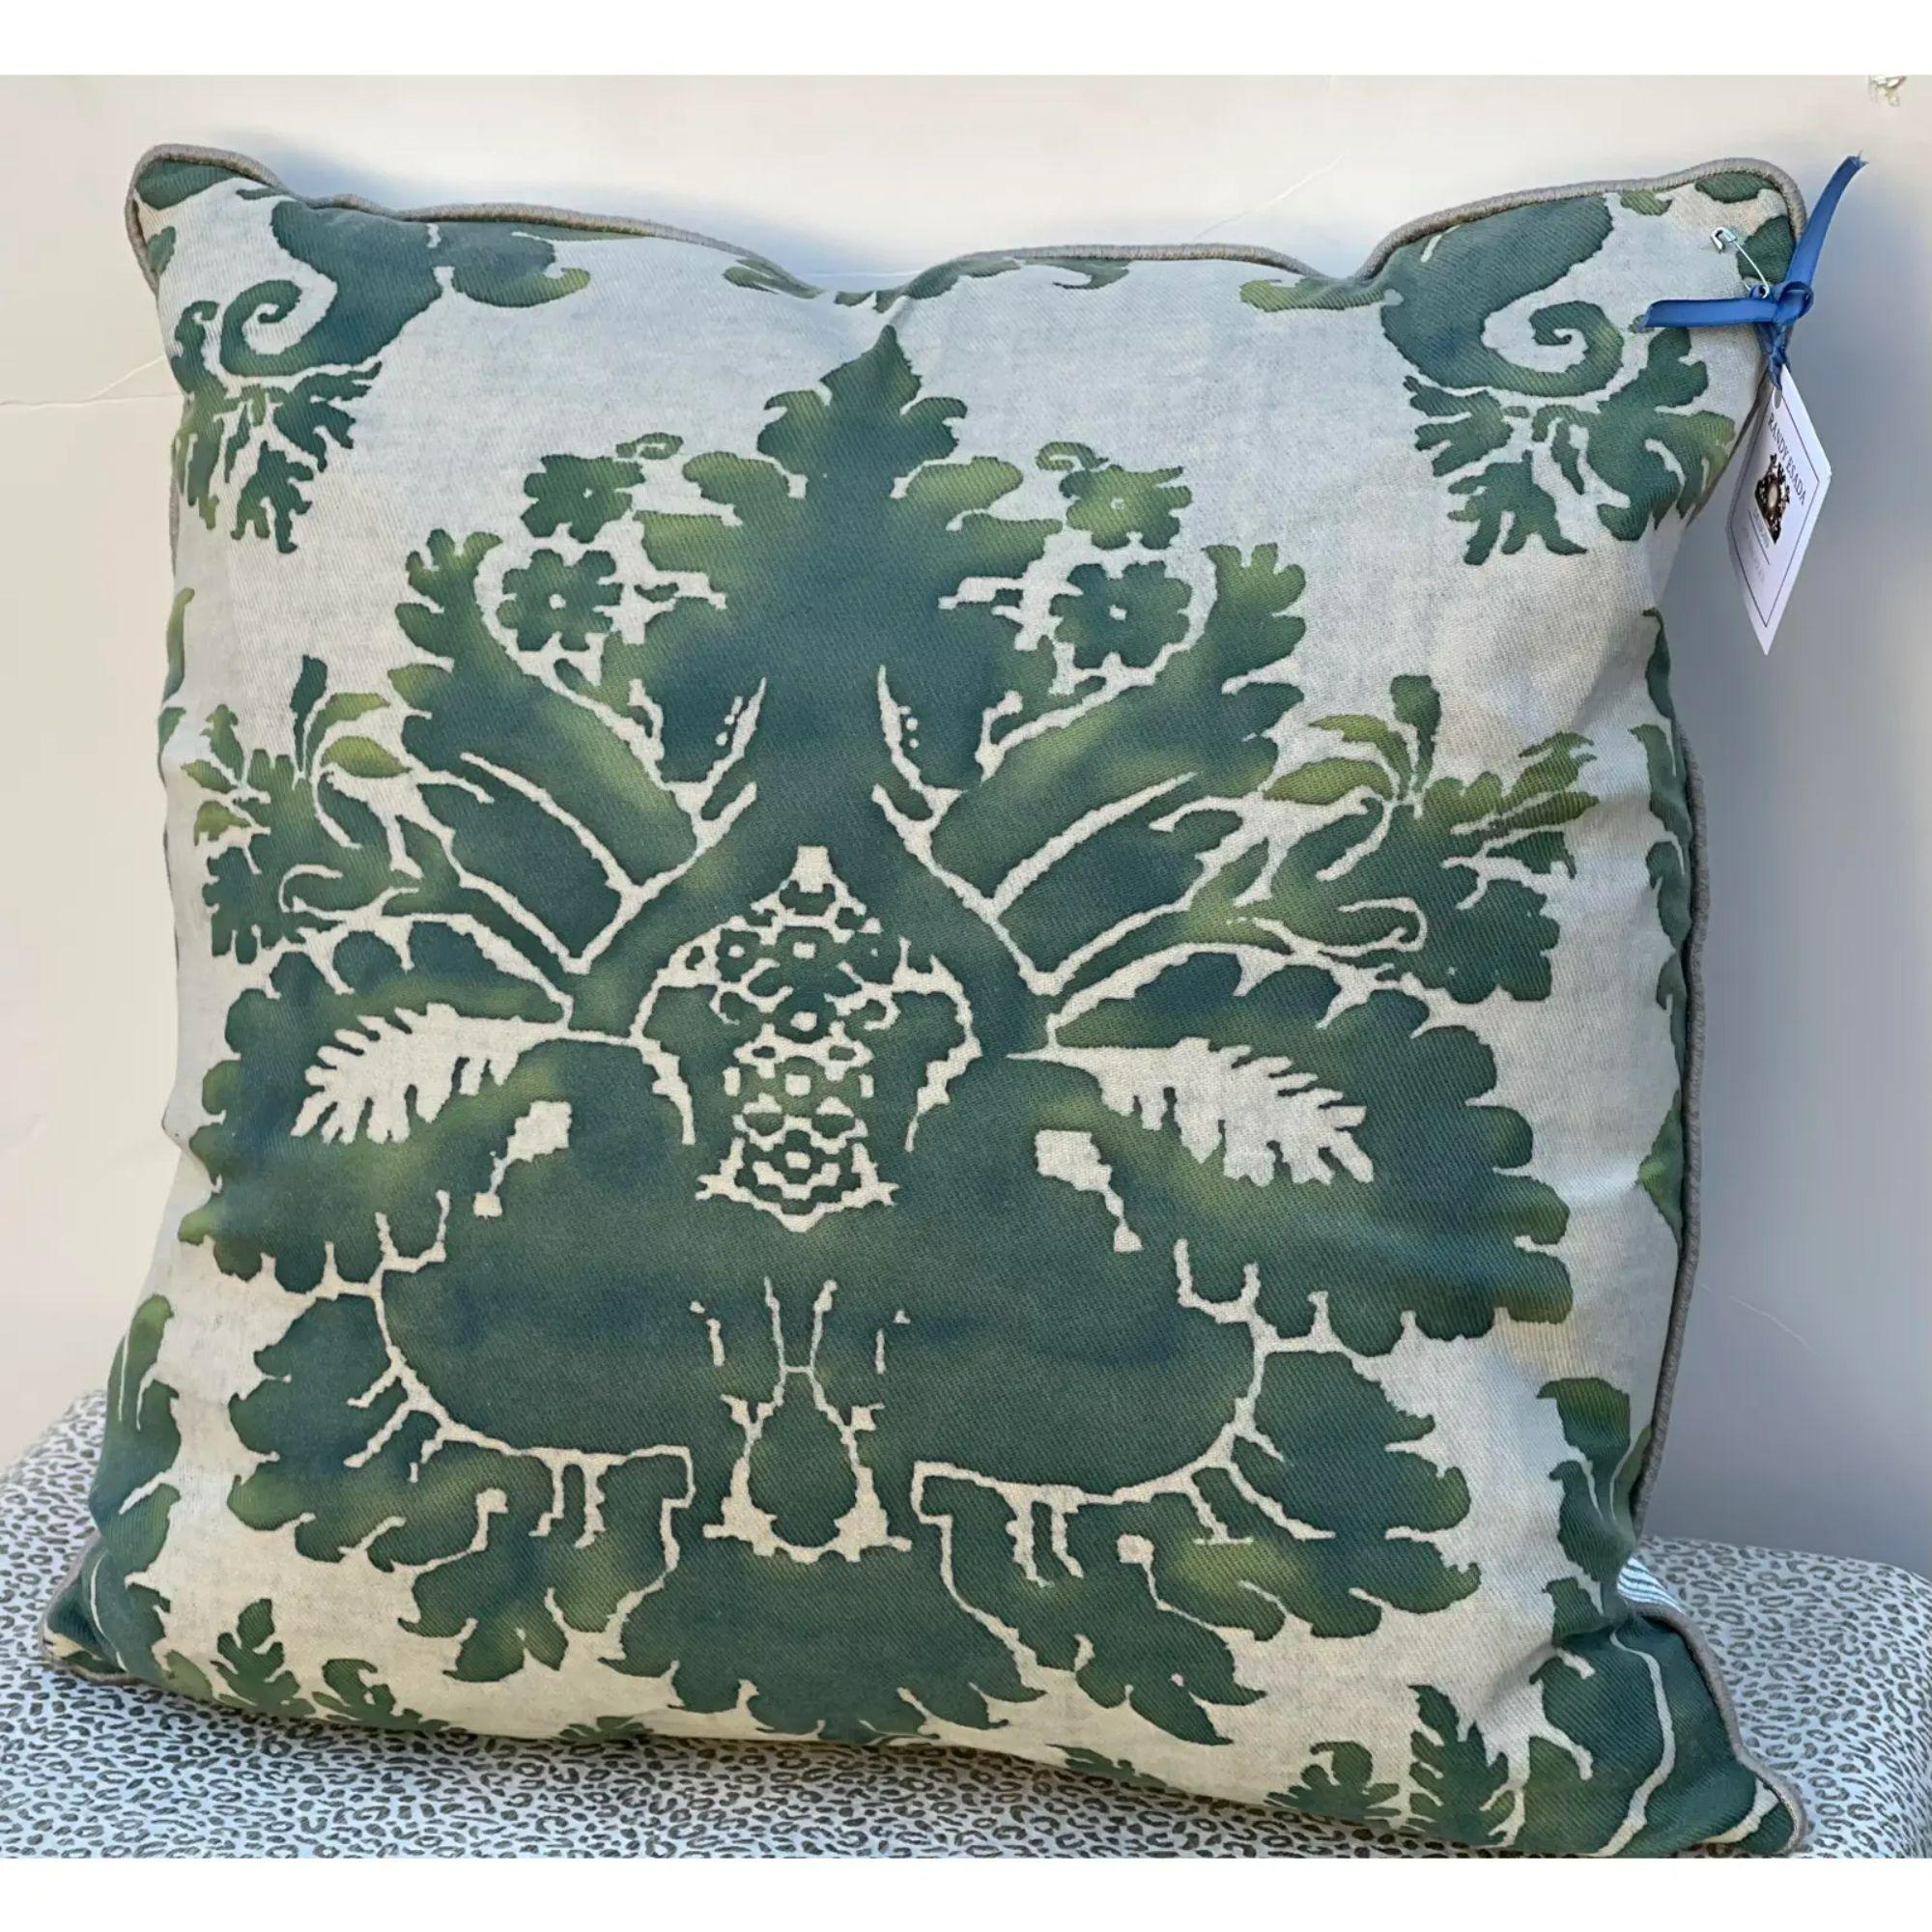 Fortuny Italian Green Hand Printed Down Filled Feather Pillow

Additional information:
Materials: Feather
Color: Green
Pattern: Damask
Brand: Fortuny
Designer: Mariano Fortuny
Period: 2000 - 2009
Styles: Italian
Item Type: Vintage, Antique